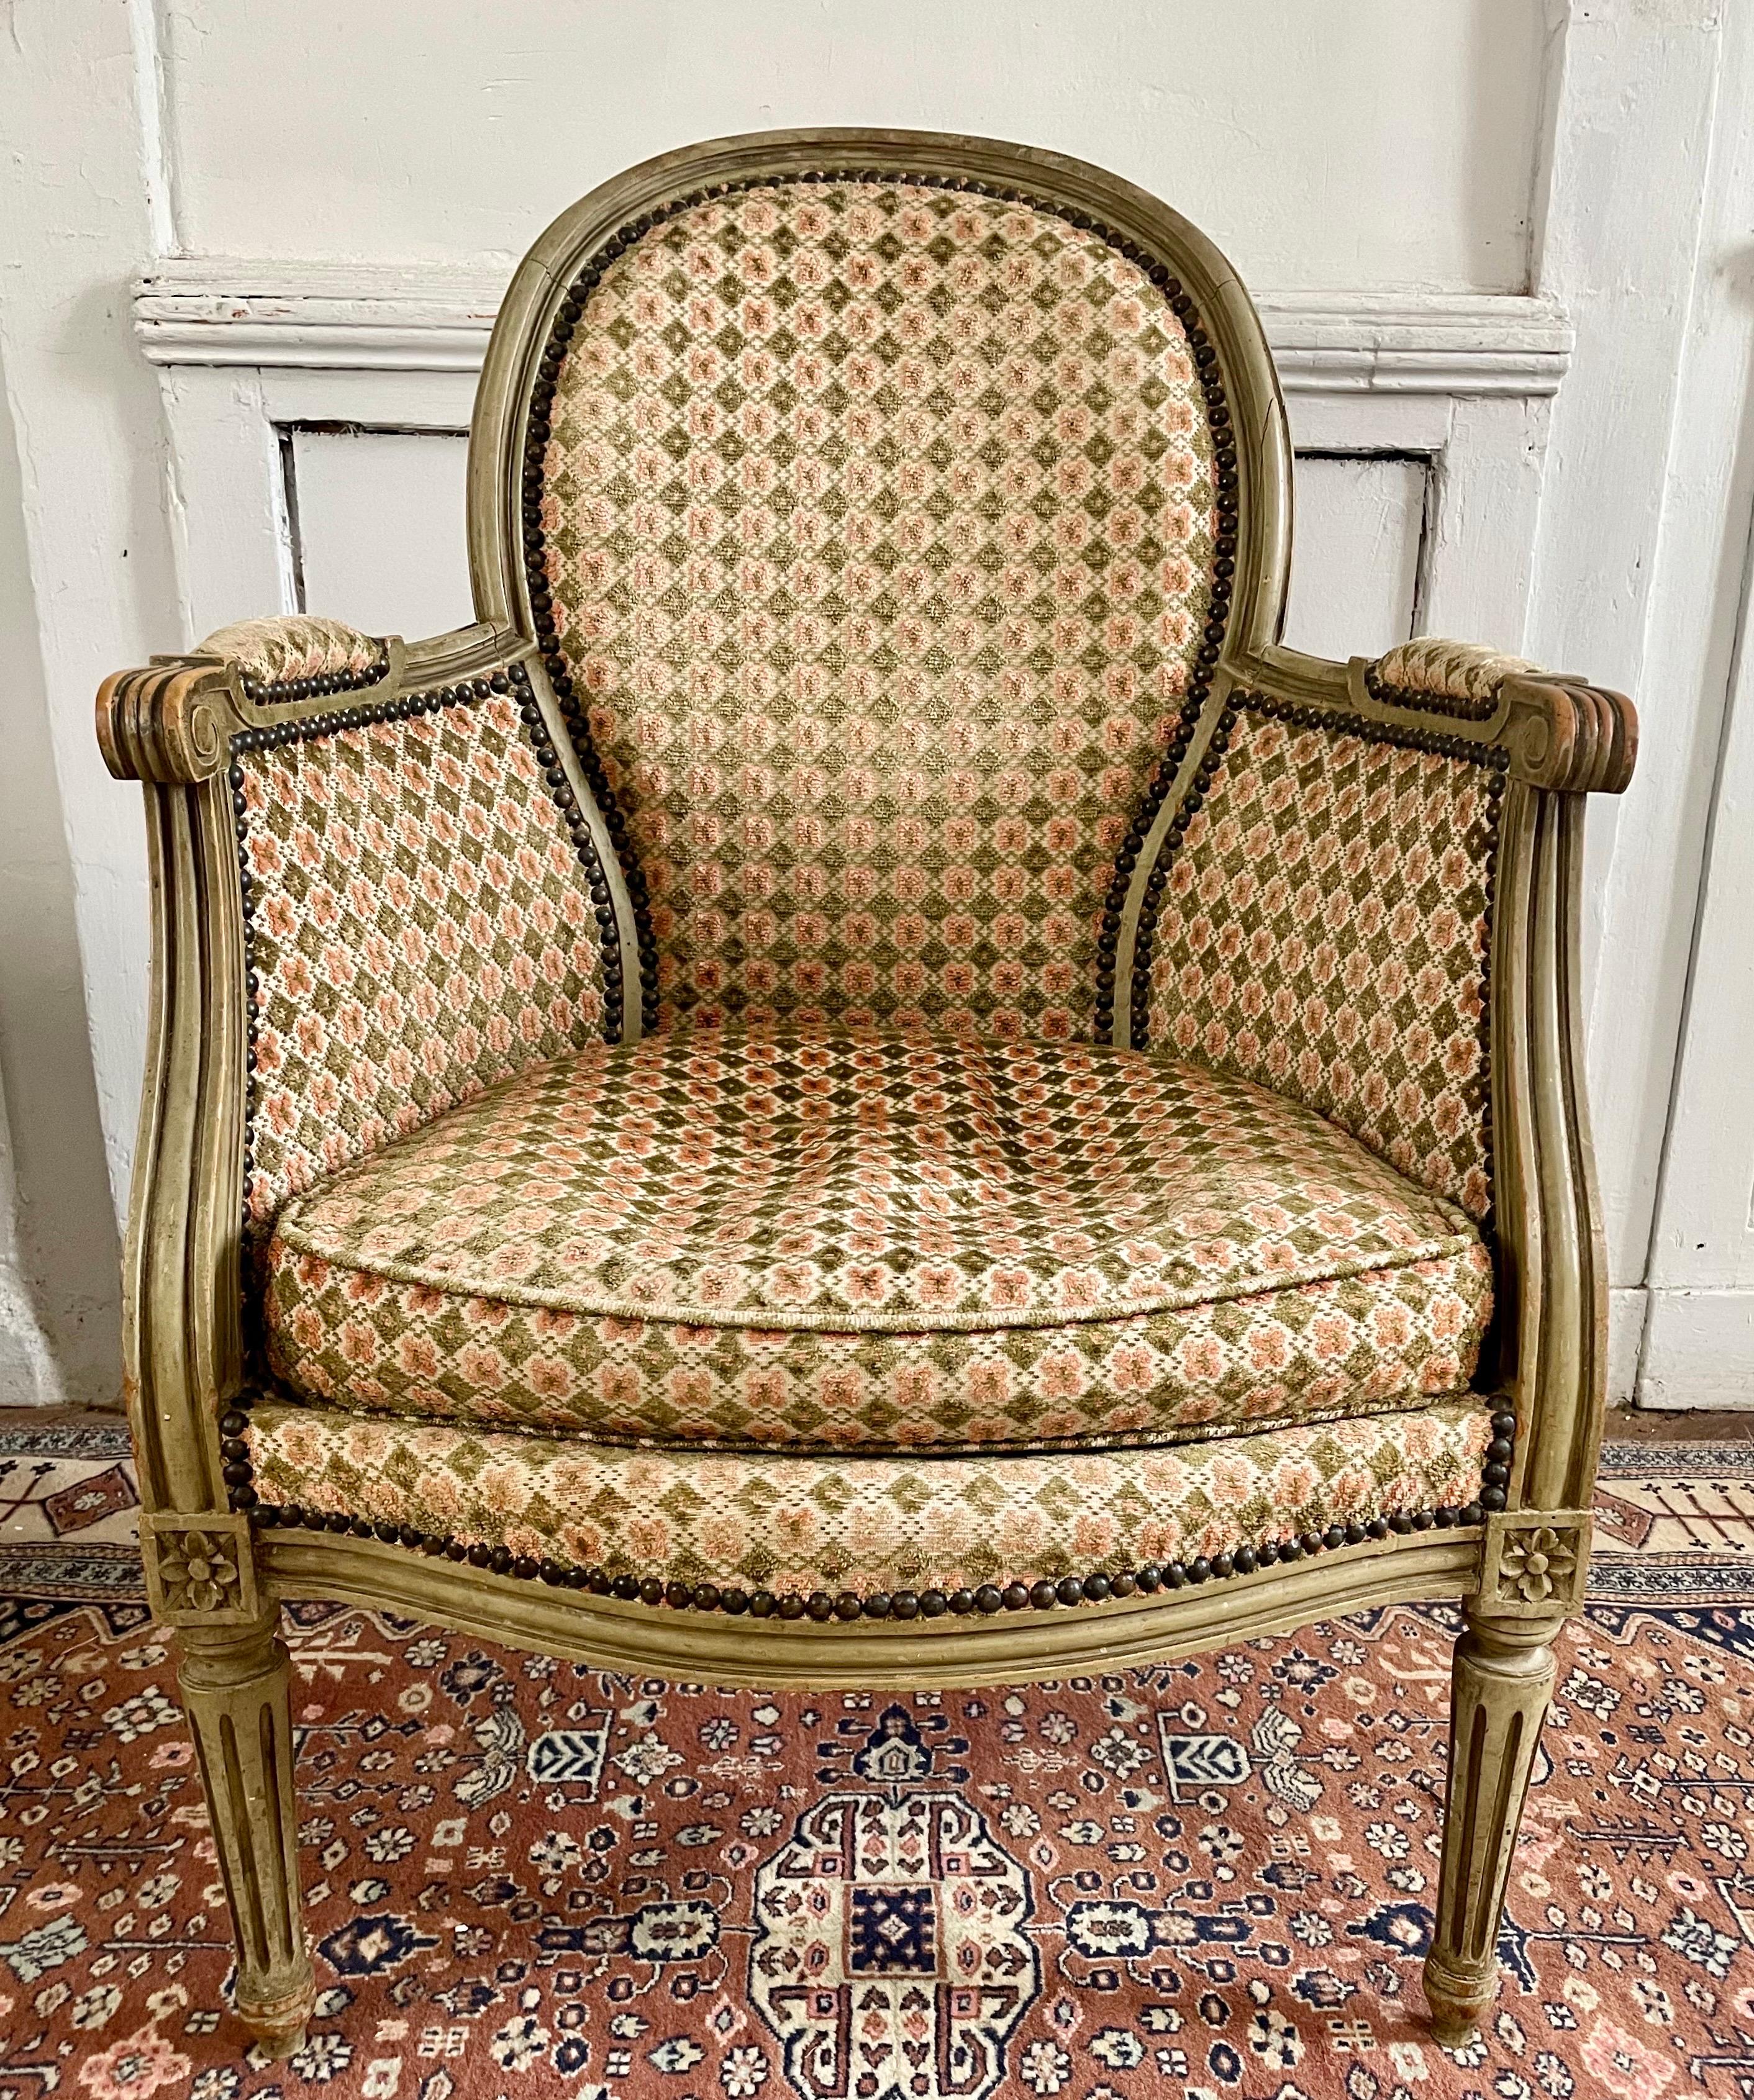 Upholstery Pair of French Bergere Armchairs in Wood and Velvet Louis XVI Style, 19th